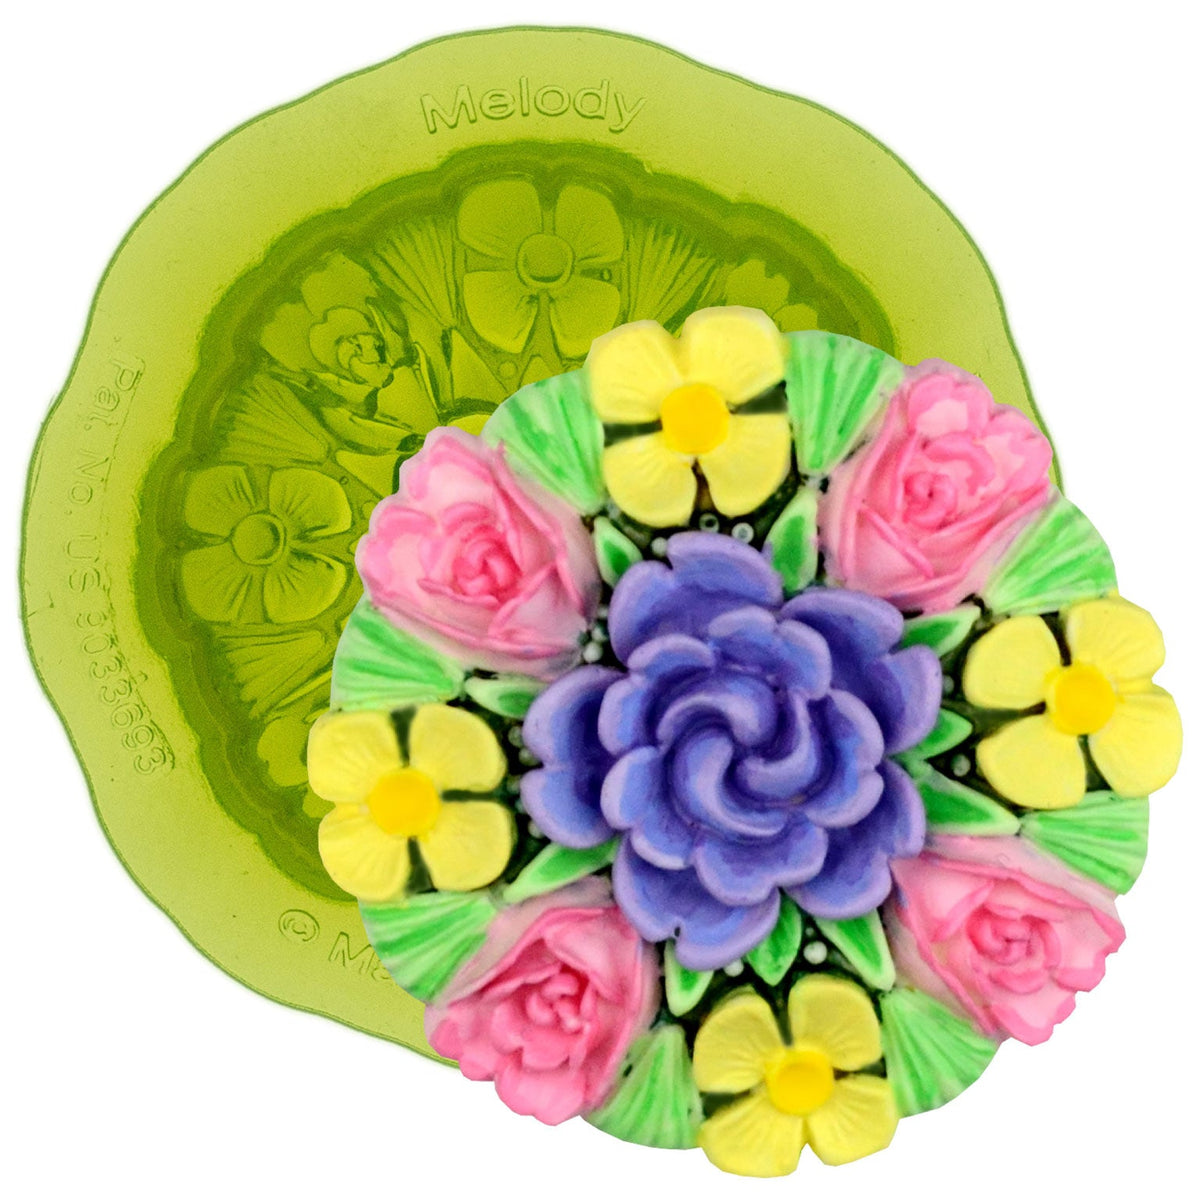 Melody Floral Silicone Sprig Mold for Resin Crafts, Pottery, or Ceramics by Marvelous Molds